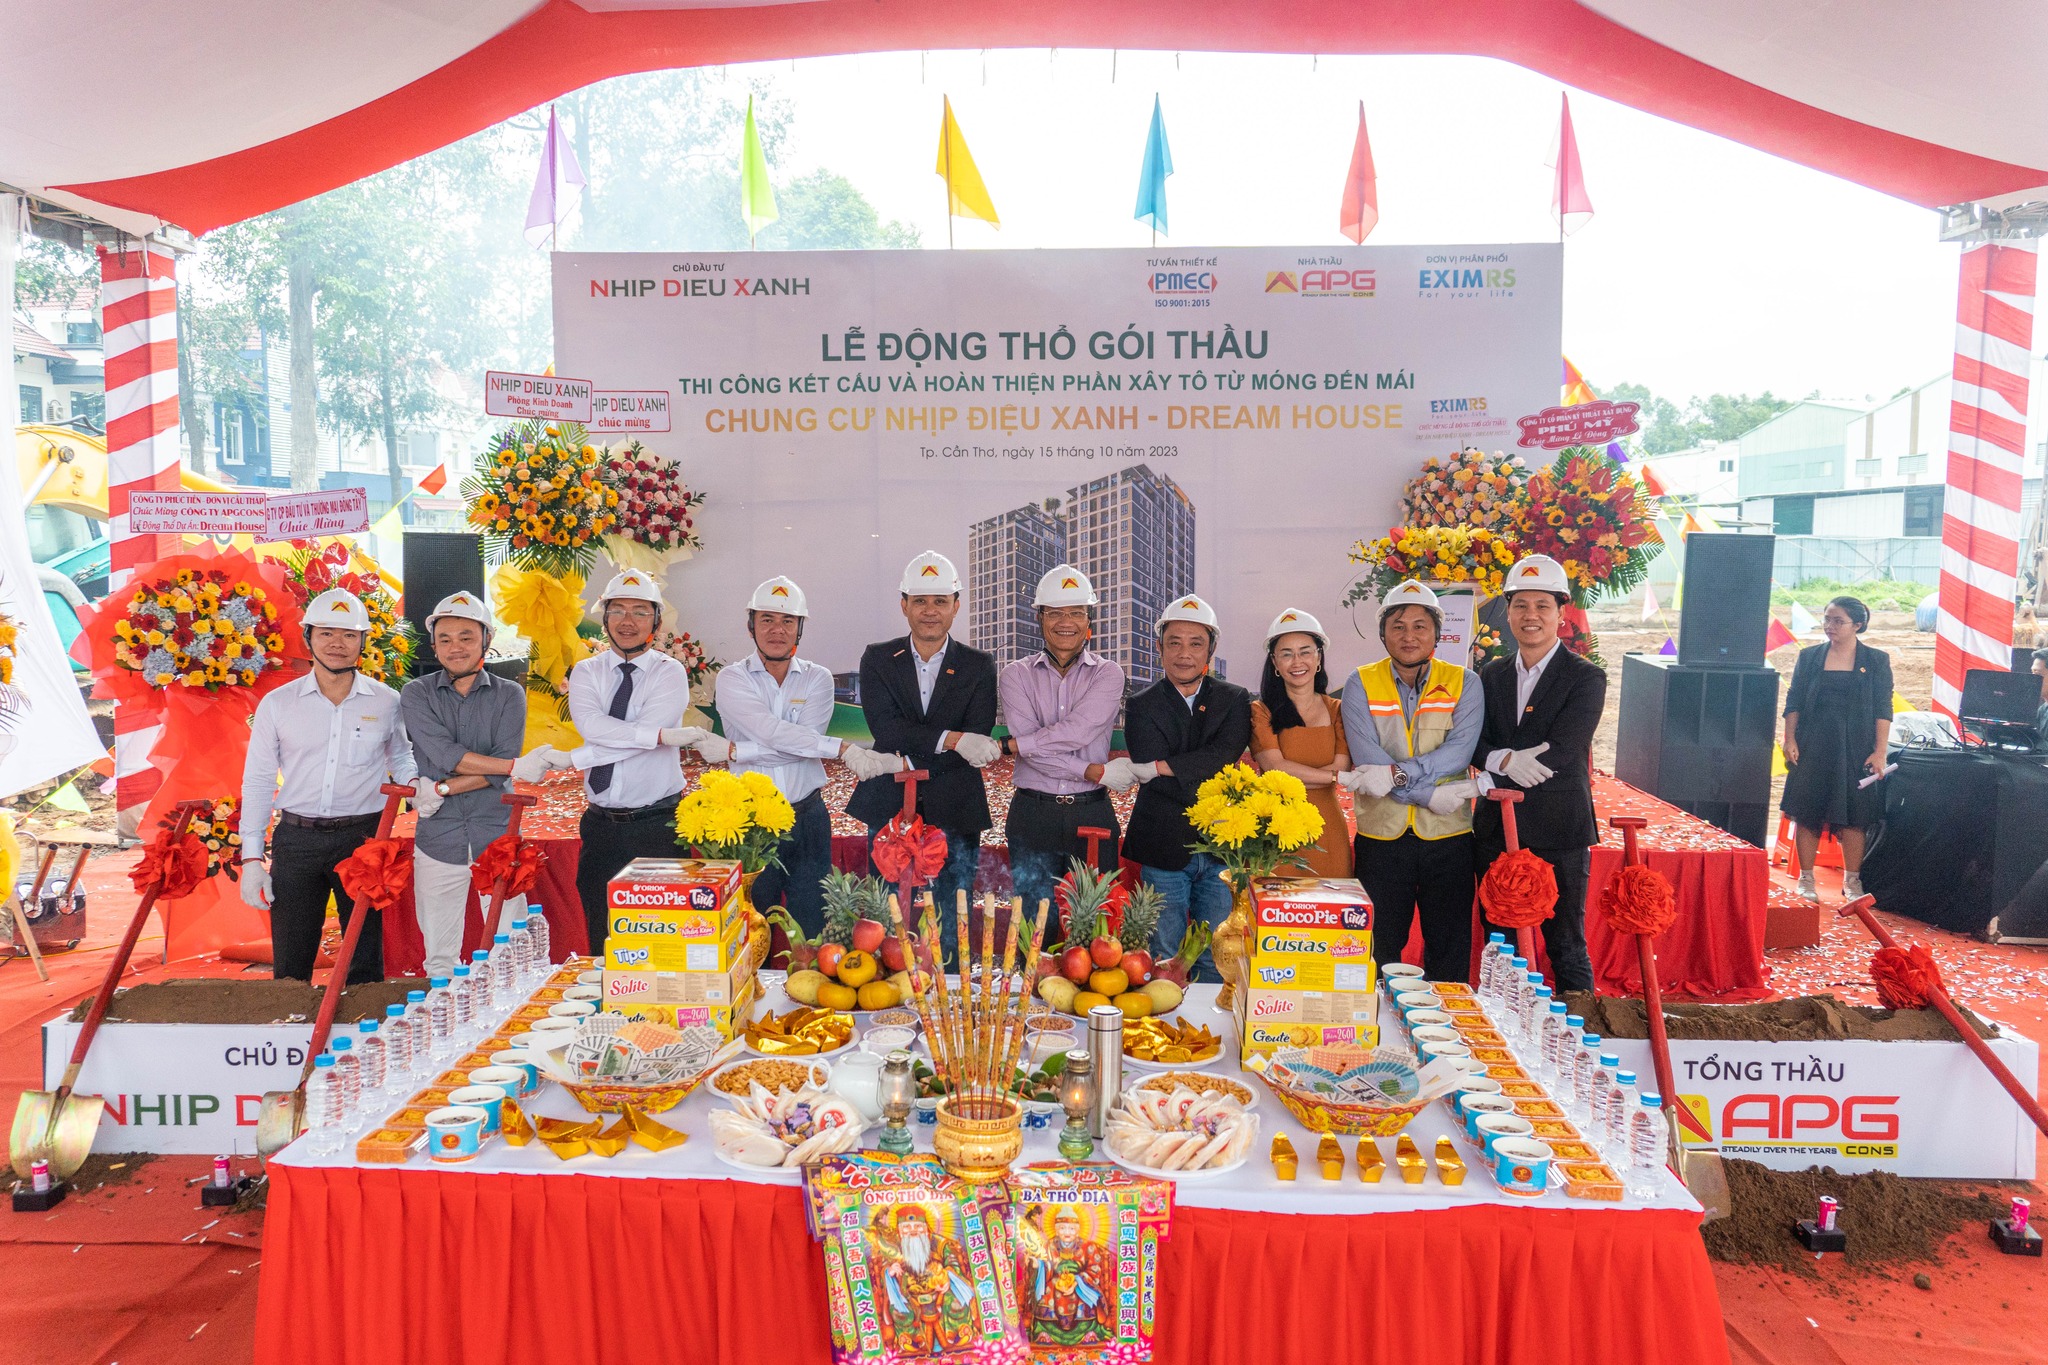 APGCONS AND EXIMRS COORDINATED TO BREAK GROUND ON THE NHIP DIEU XANH PROJECT - DREAM HOUSE